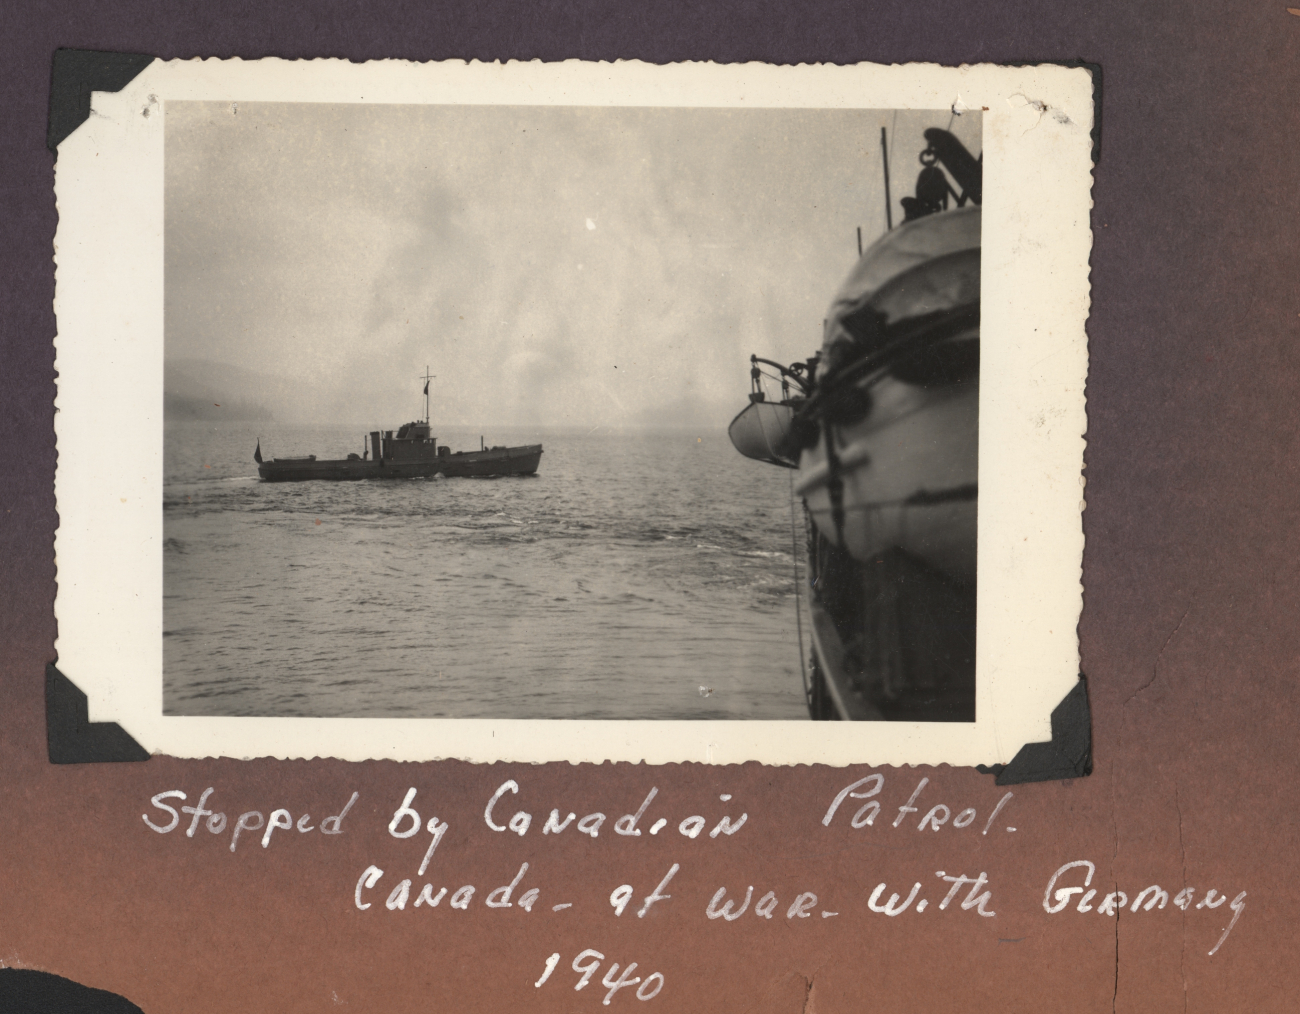 Coast and Geodetic Survey Ship SURVEYOR stopped by Canadian patrol inCanadian Inside Passage as Canada the British Commonwealth of Nations was atwar with Germany at the time